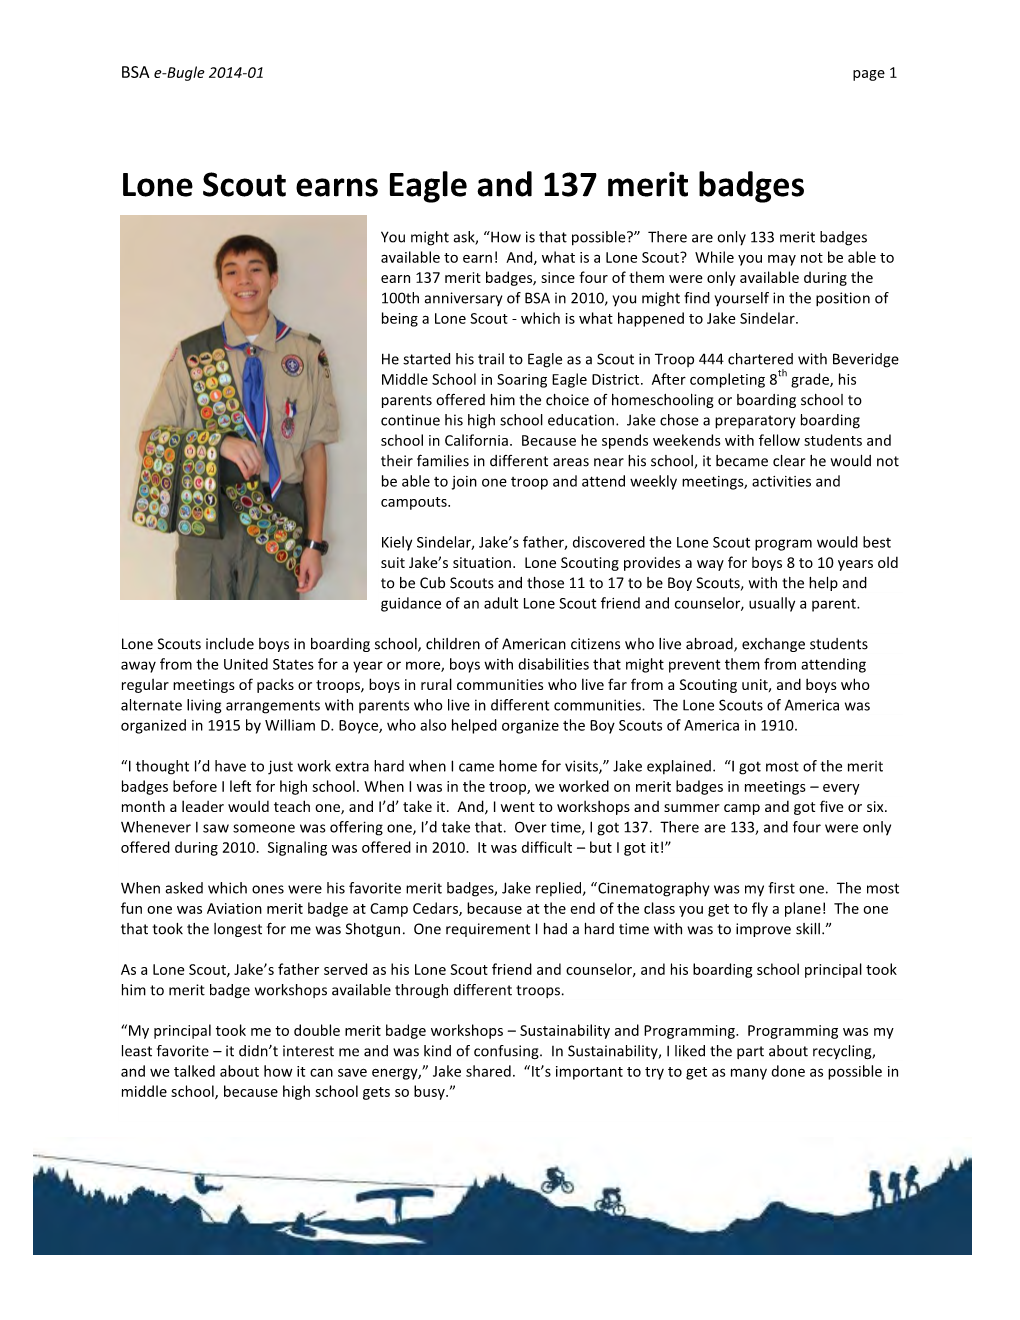 Lone Scout Earns Eagle and 137 Merit Badges